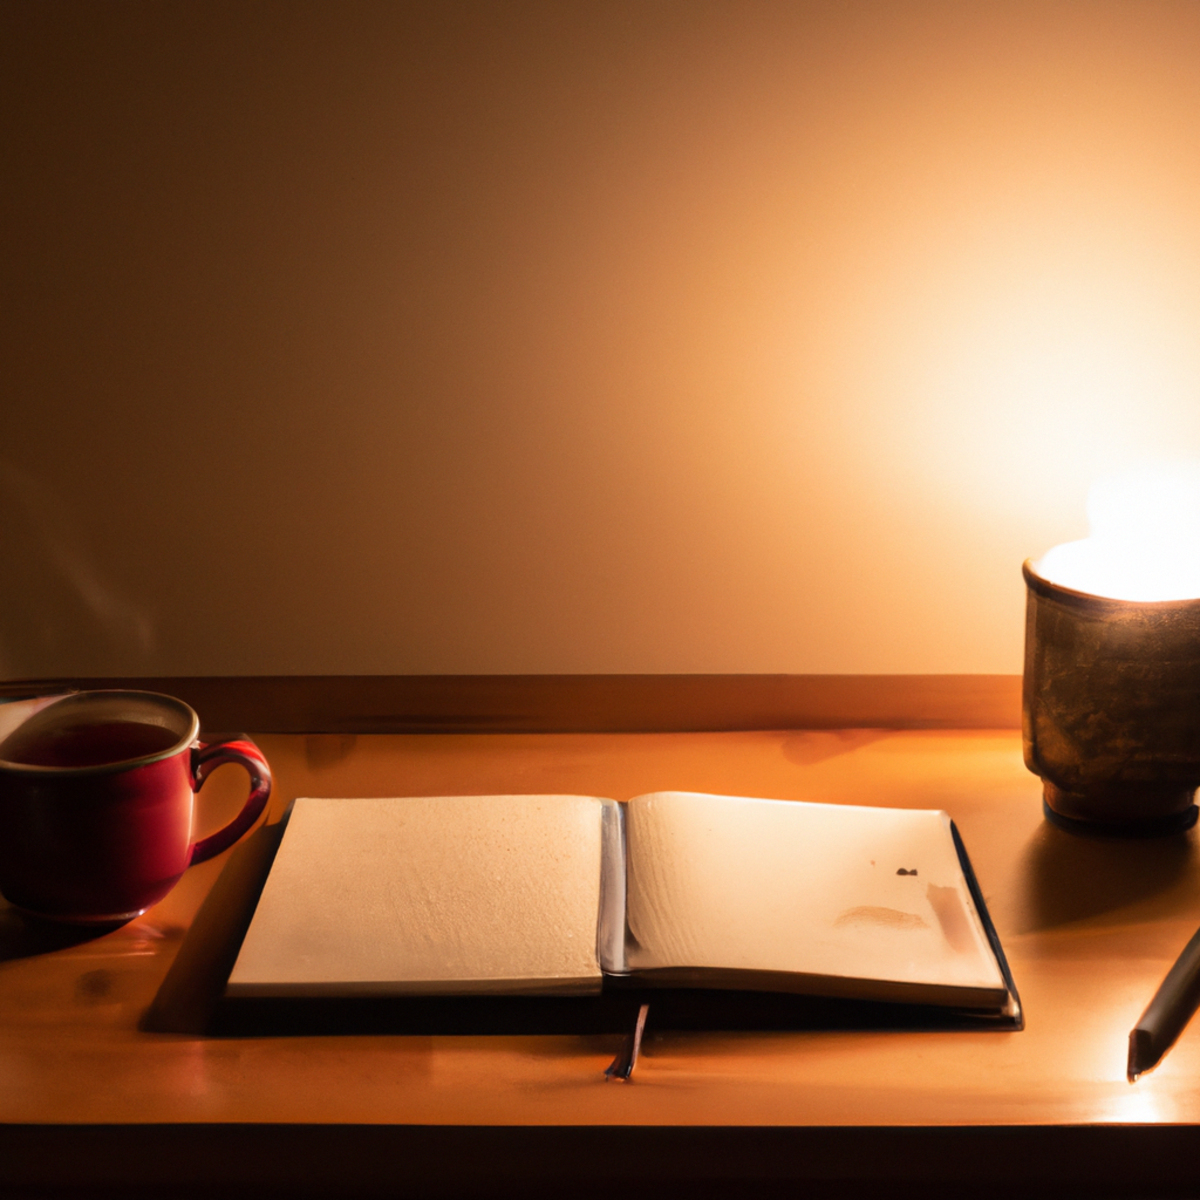 A serene scene of a wooden desk with tea, journal, and pen, reminding us to practice daily stress management.